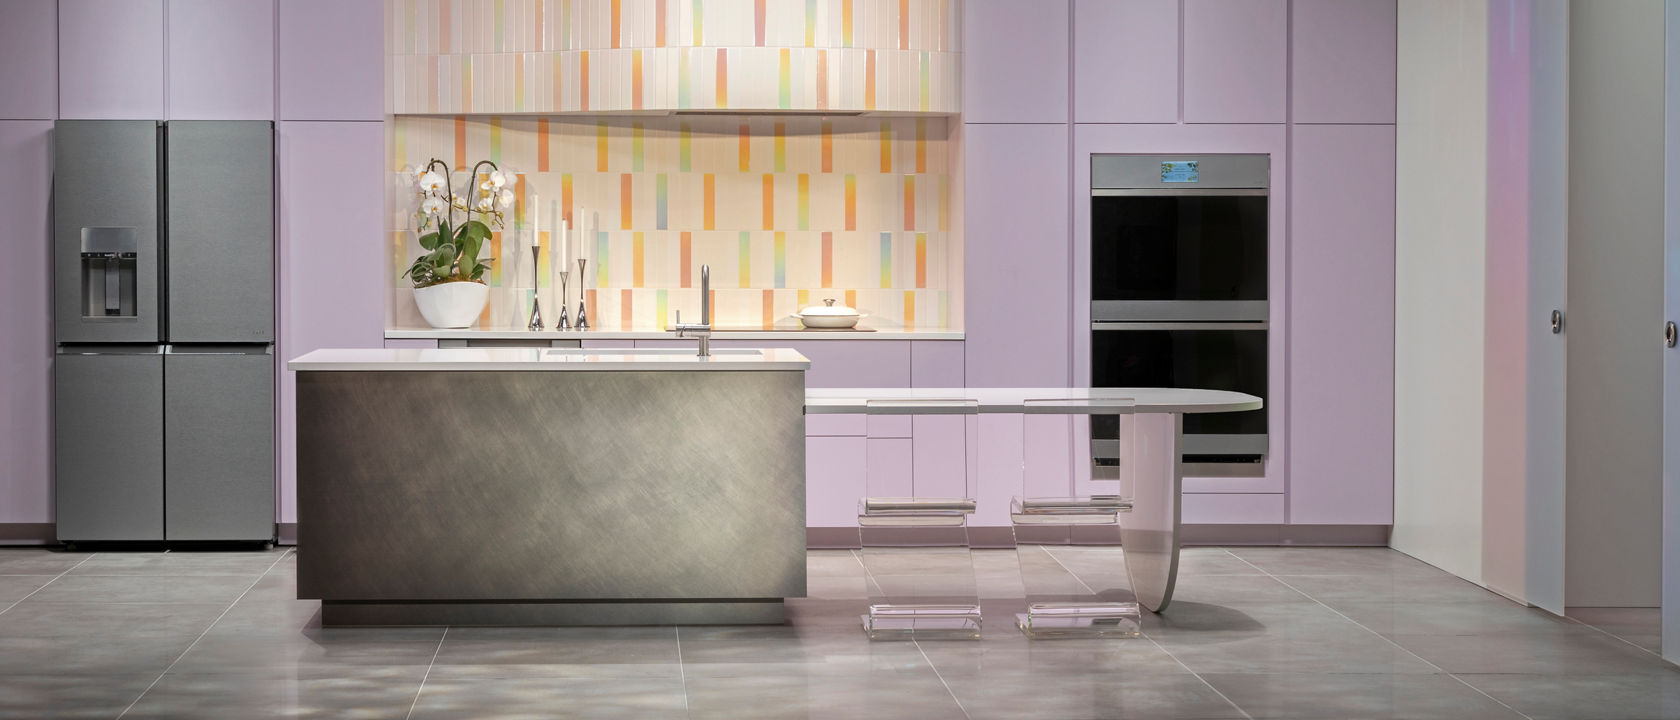 a ethereal kitchen design with purple cabinets, colorful tiled backsplash, modern GE appliances, white quartz countertops, and a modern island. 